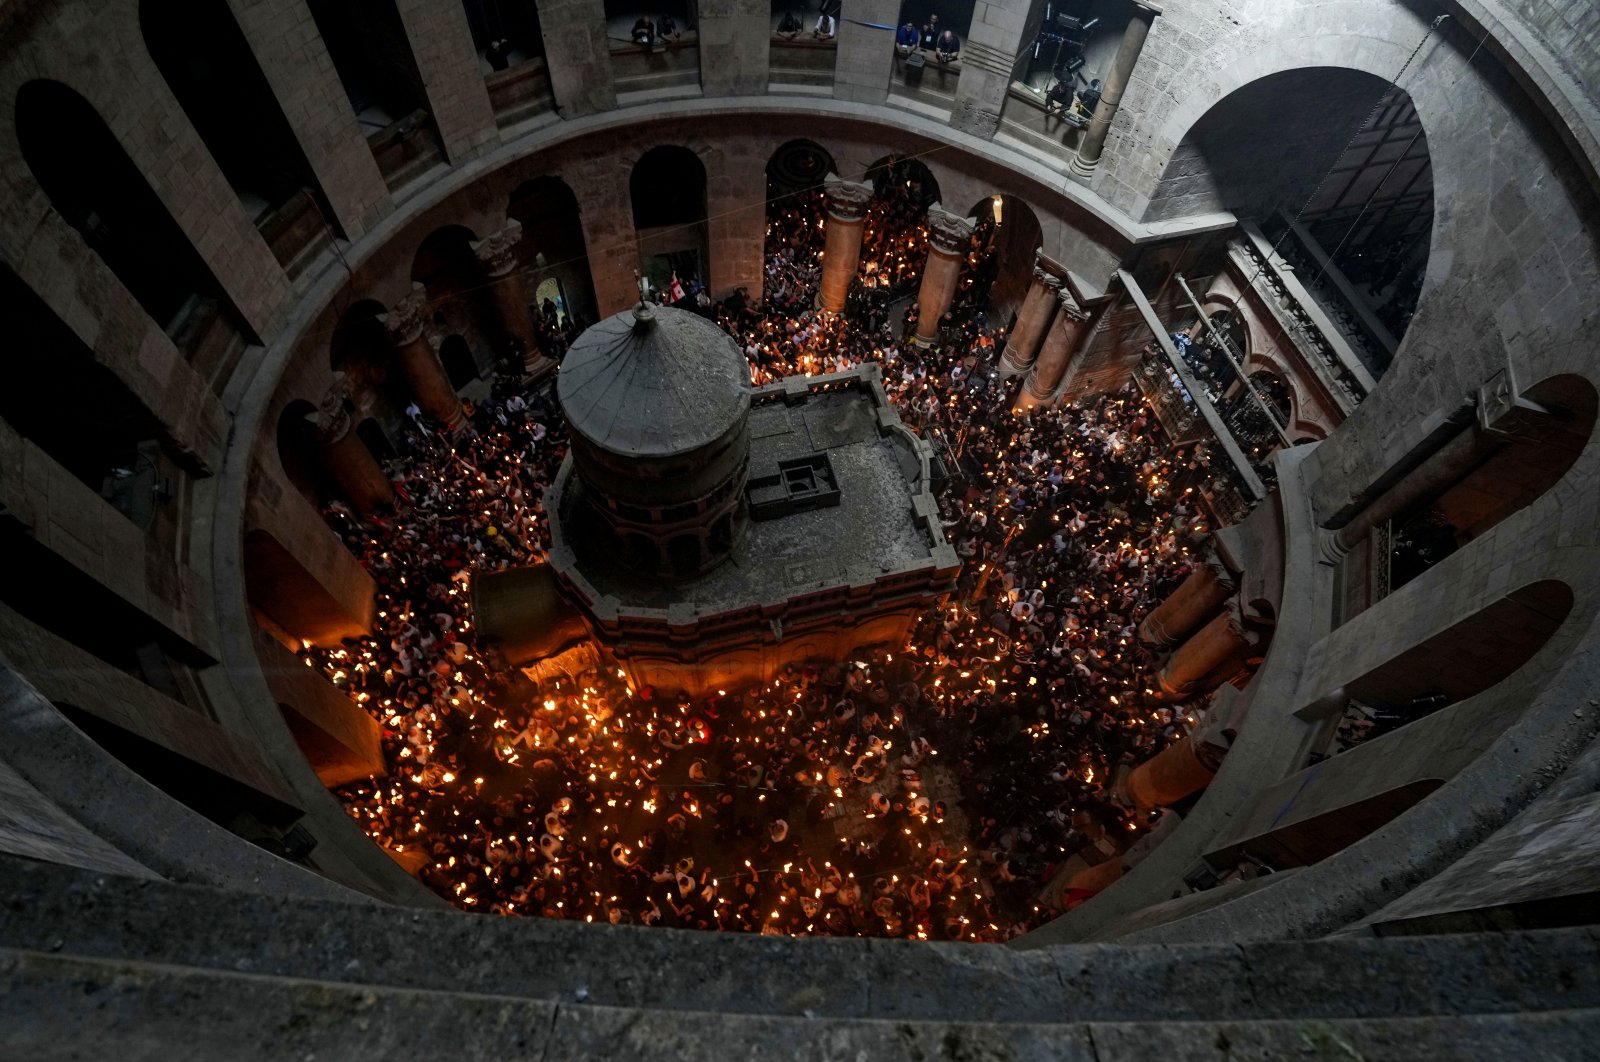 Christian pilgrims hold candles as they gather during the ceremony of the Holy Fire at Church of the Holy Sepulchre in the Old City, East Jerusalem, occupied Palestine, April 23, 2022. (AP Photo)